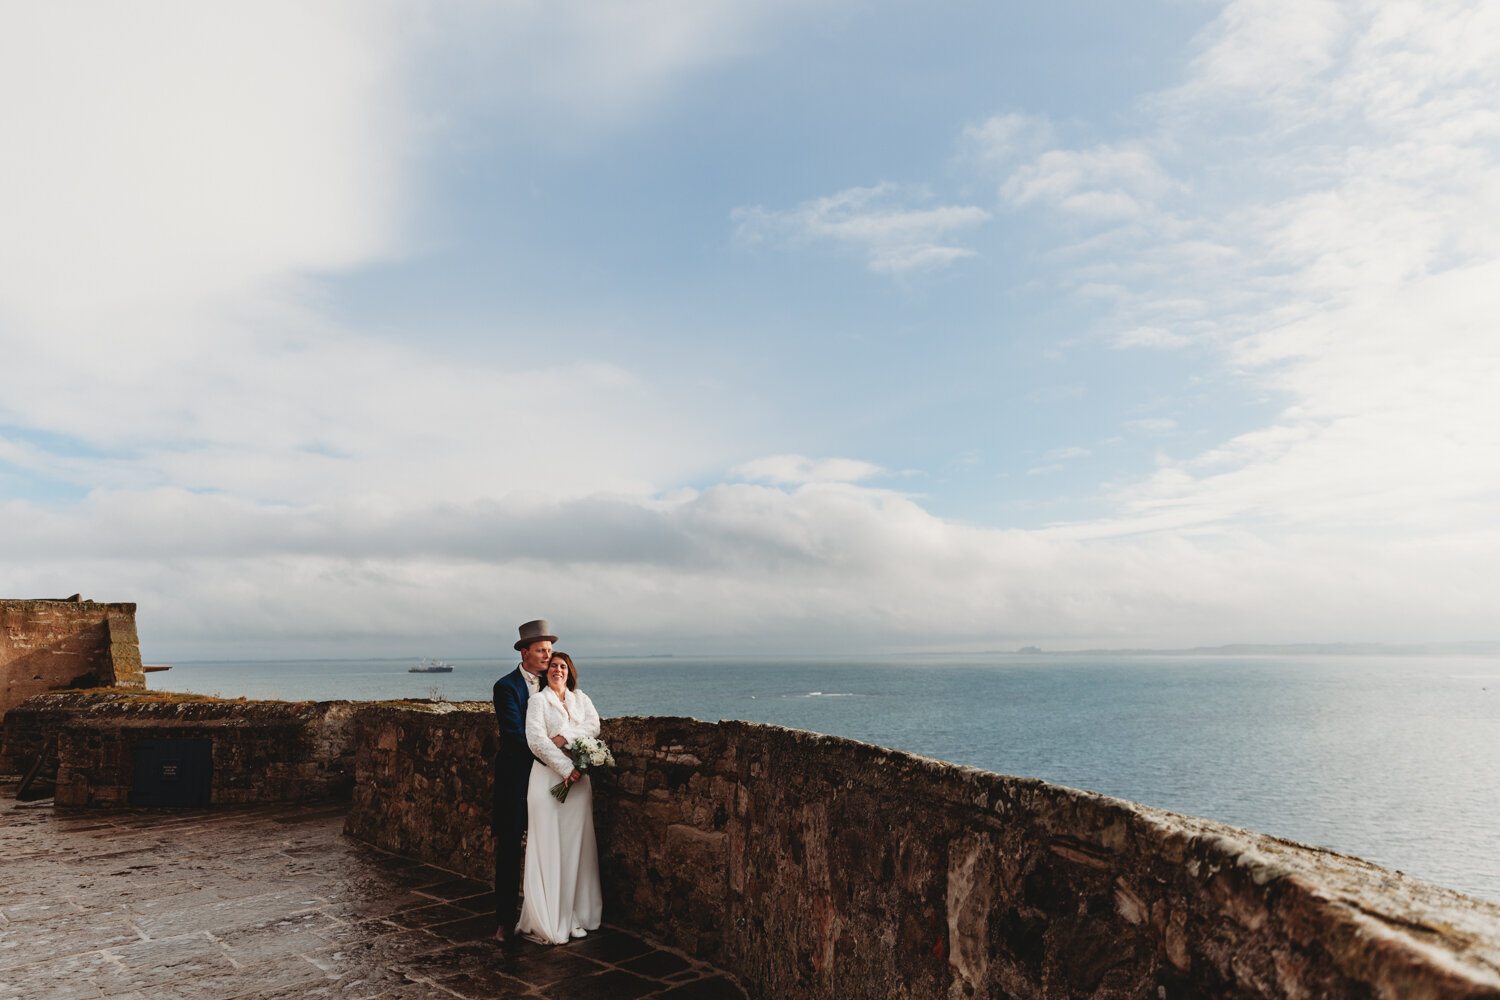 PICTORIAL_wedding-lindisfarne-castle-northumberland-photographer-mead-locally-sourced-holy-island-14.jpg